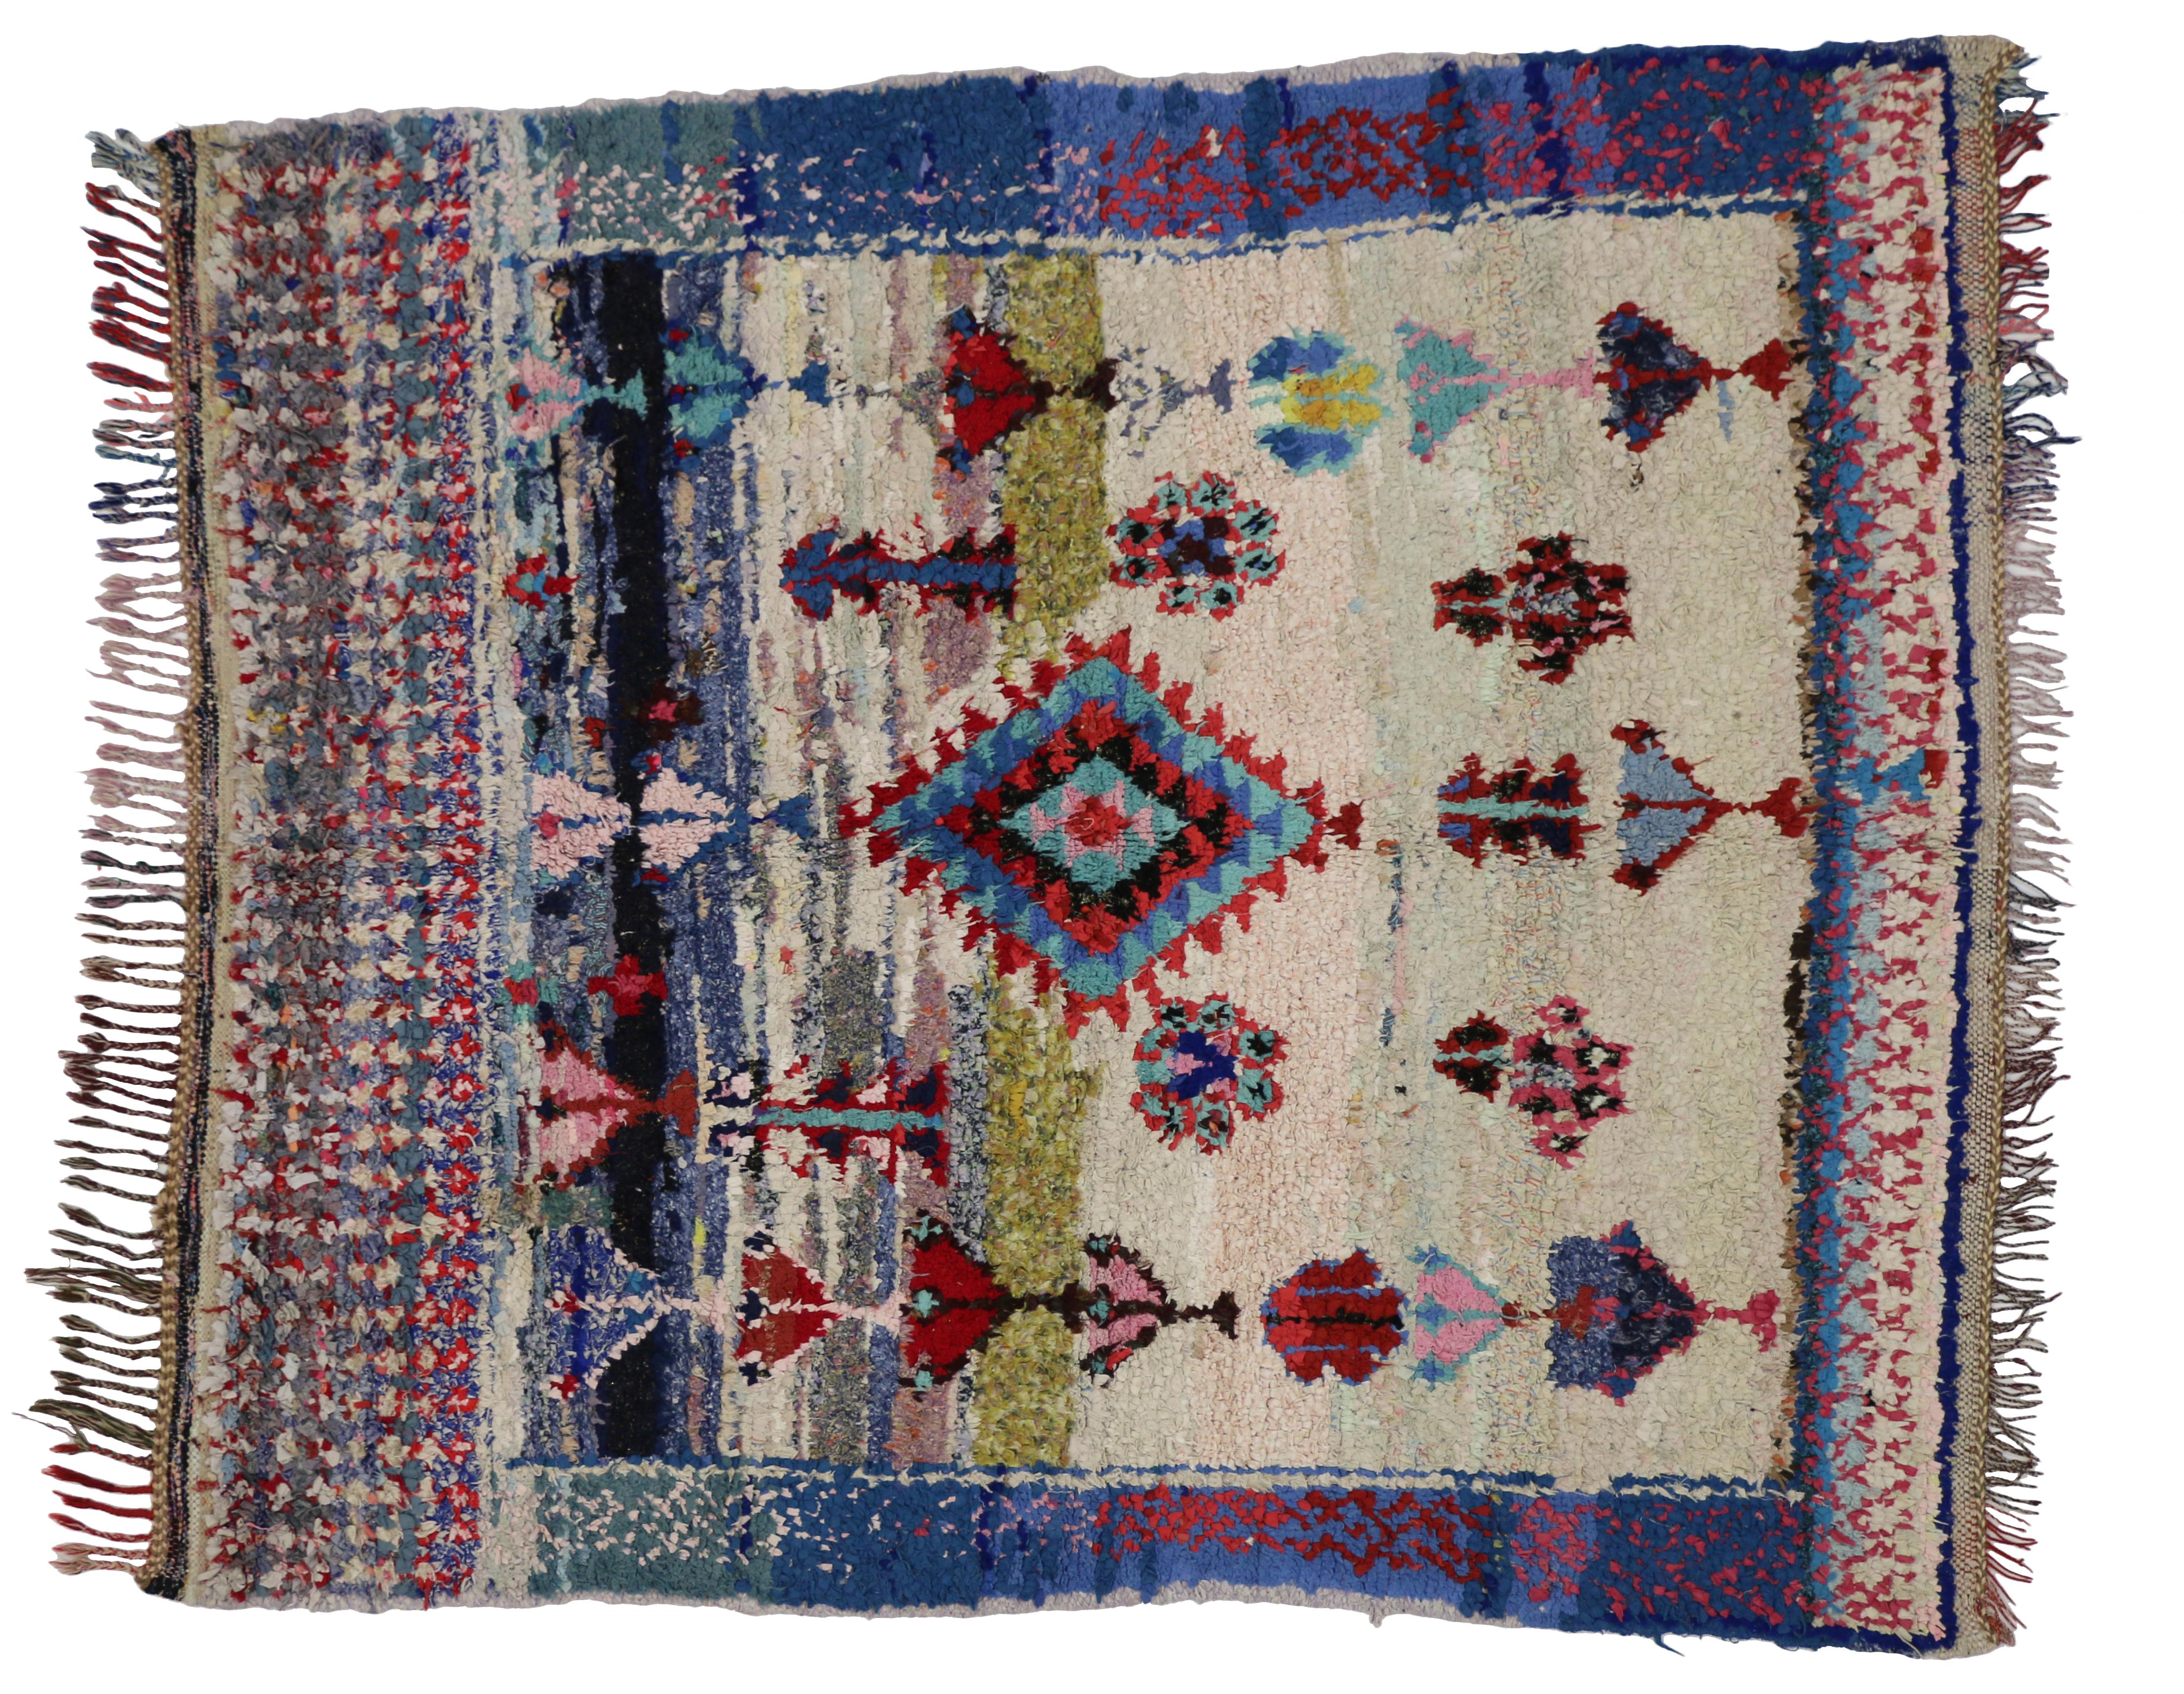 Hand-Knotted Boho Chic Vintage Berber Moroccan Boucherouite Rug, Colorful Moroccan Shag Rug